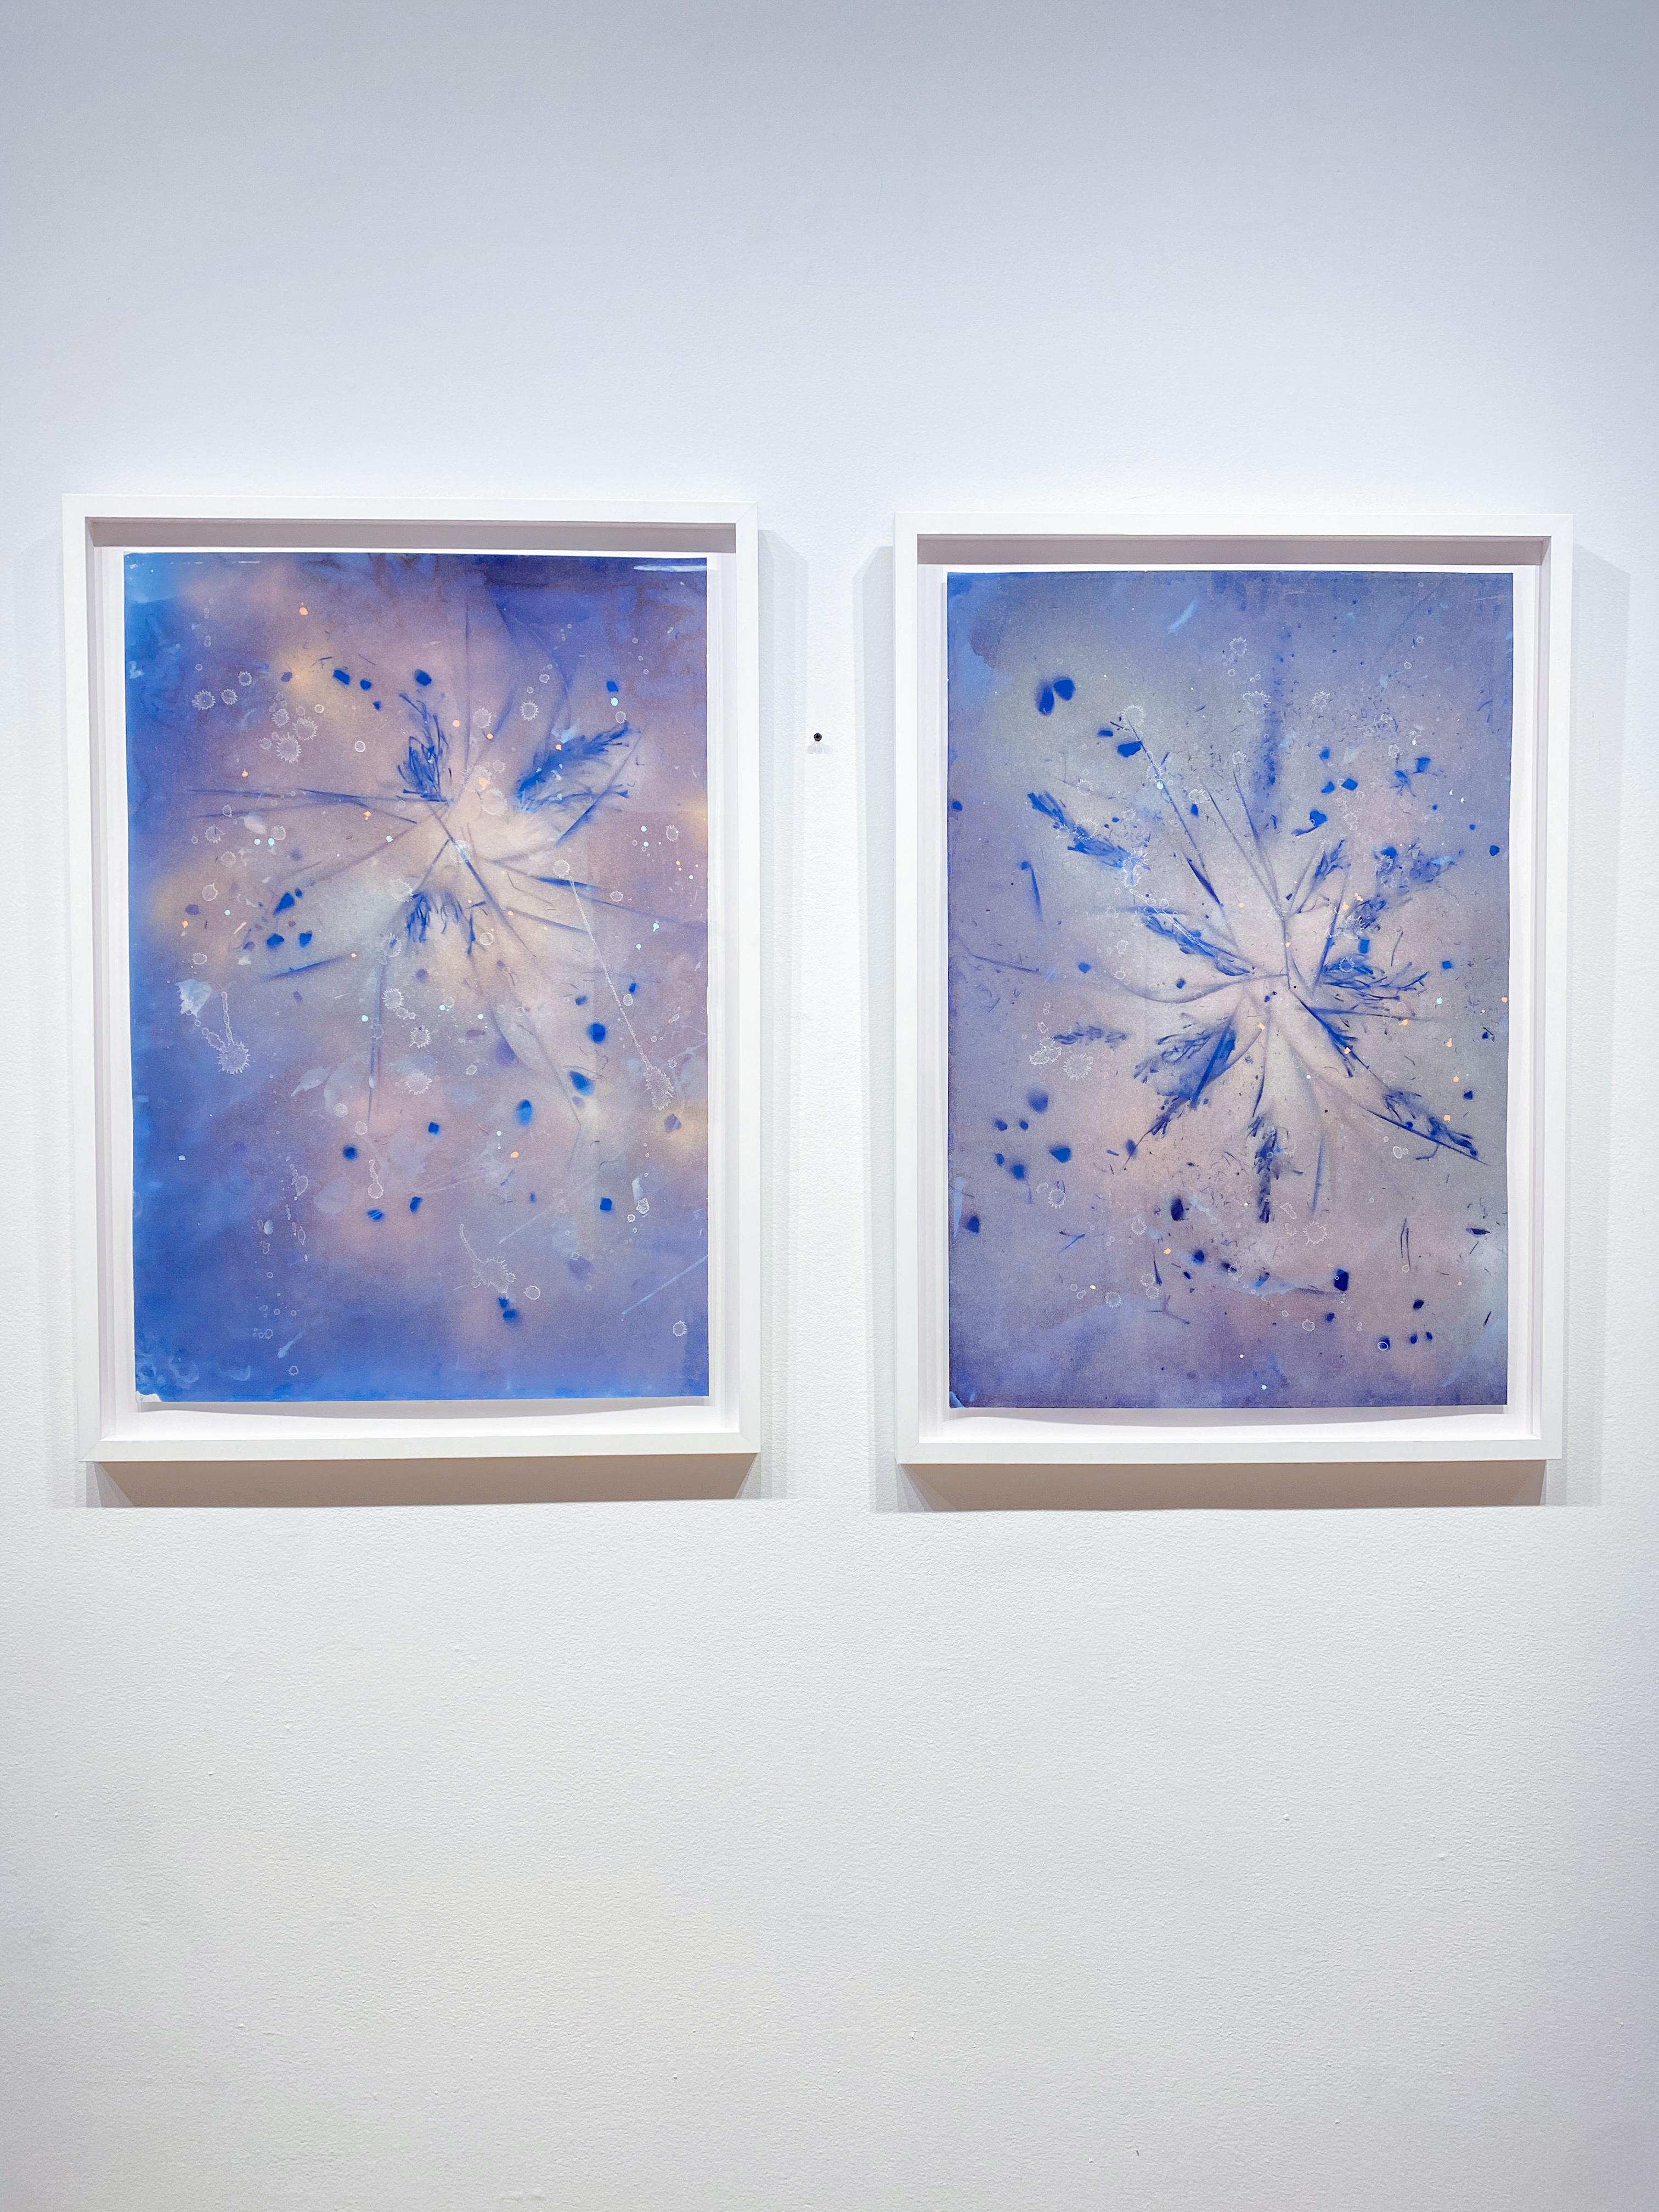 David B. Smith Gallery is pleased to welcome Long Beach, CA and Denver, CO-based artist Christine Nguyen for her introductory solo exhibition with the gallery, Lightness Within the Cosmic Universe.

Featuring photo-based collage and photo-process